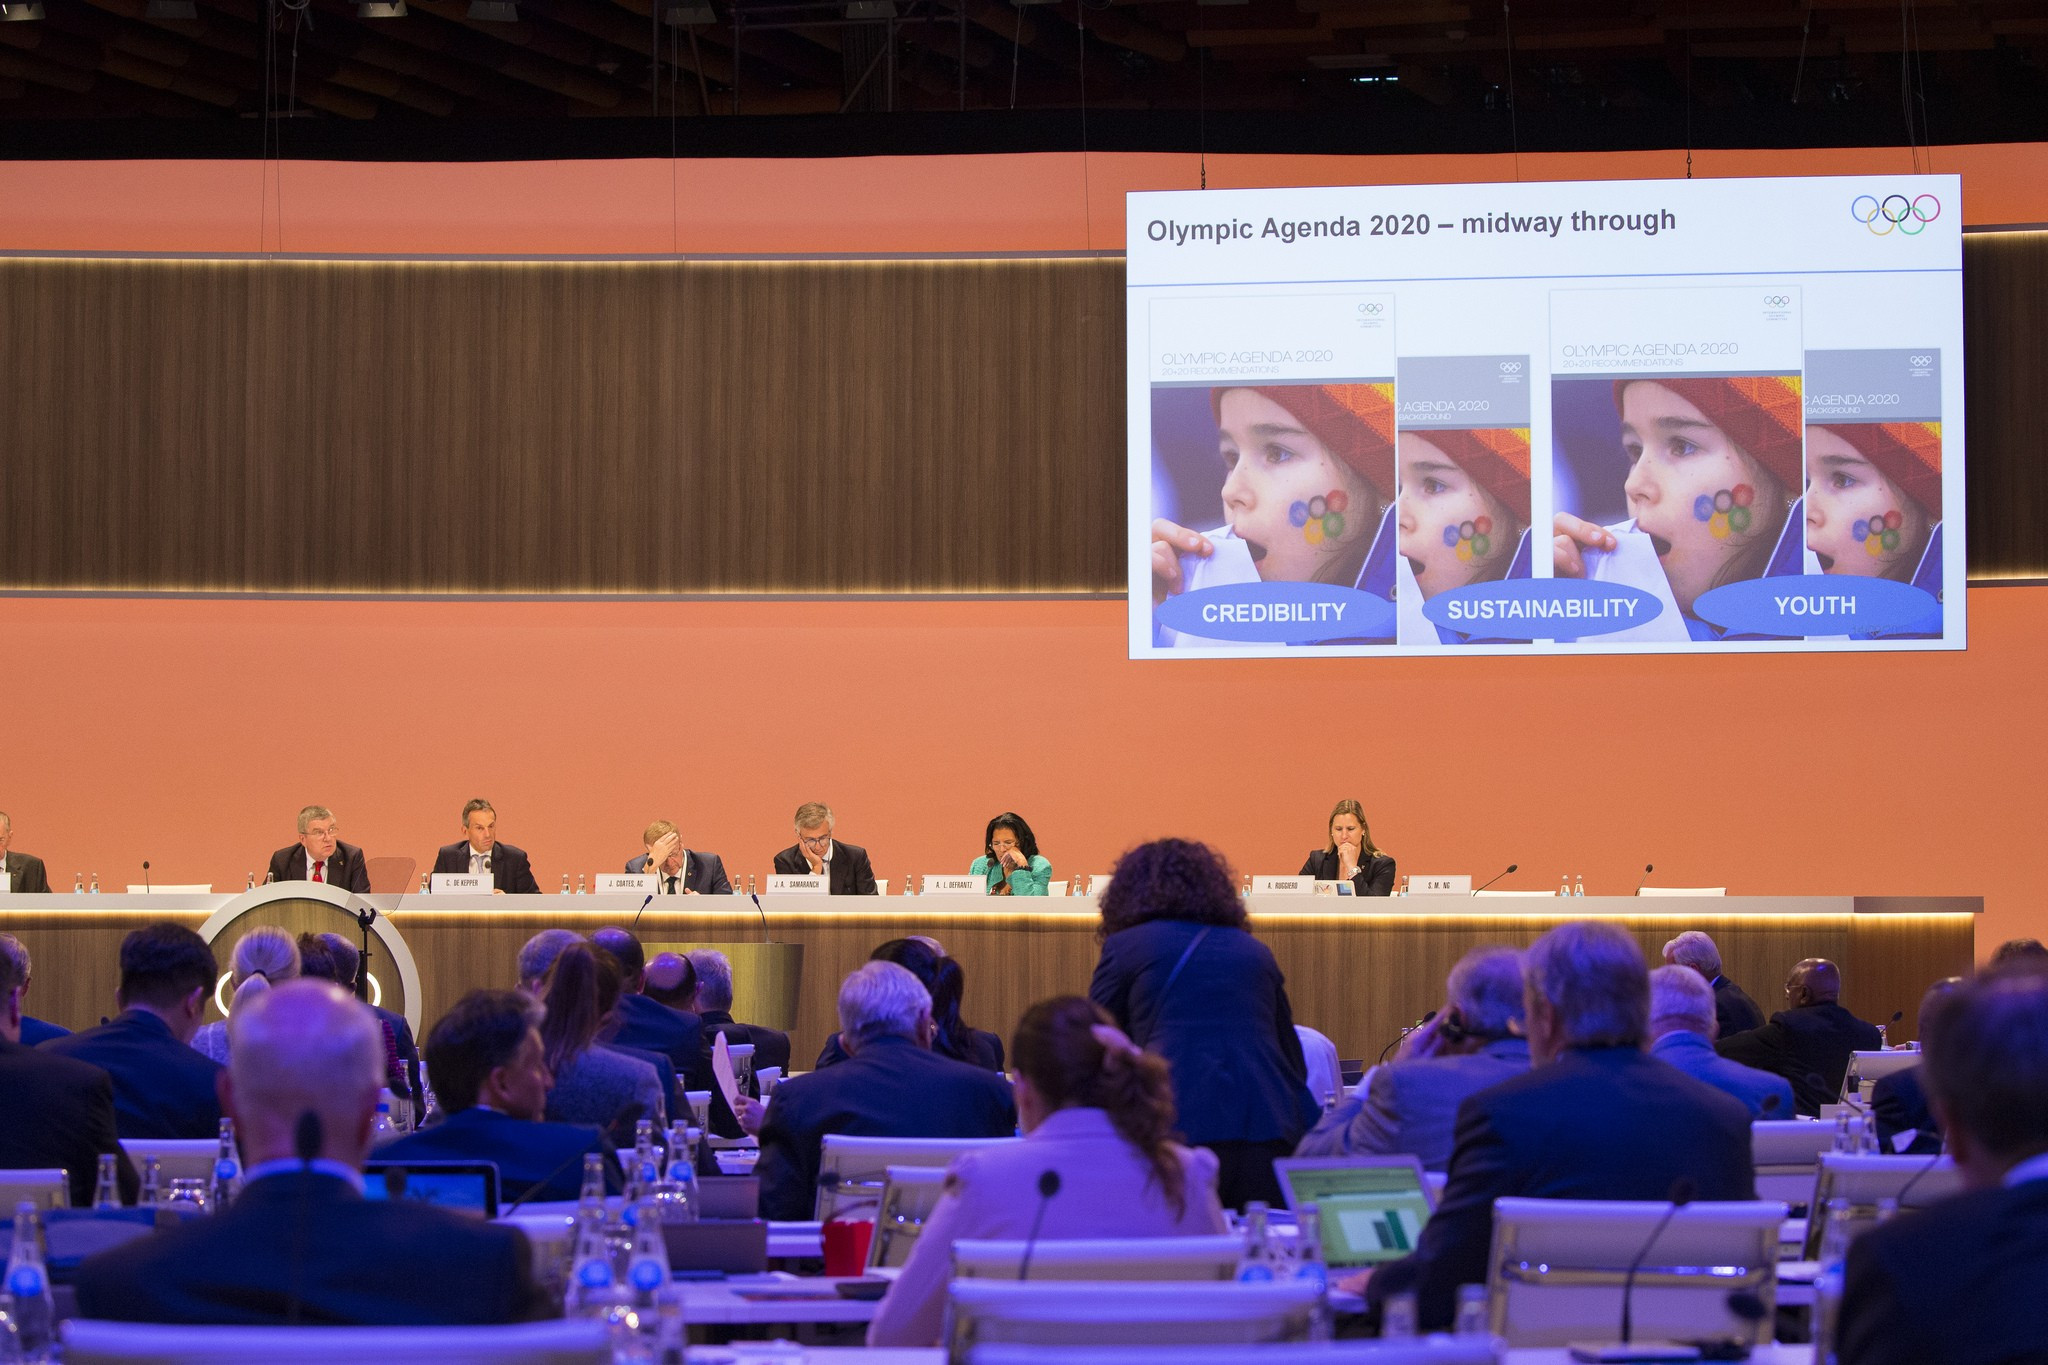 The afternoon focused on the Agenda 2020 reforms ©IOC